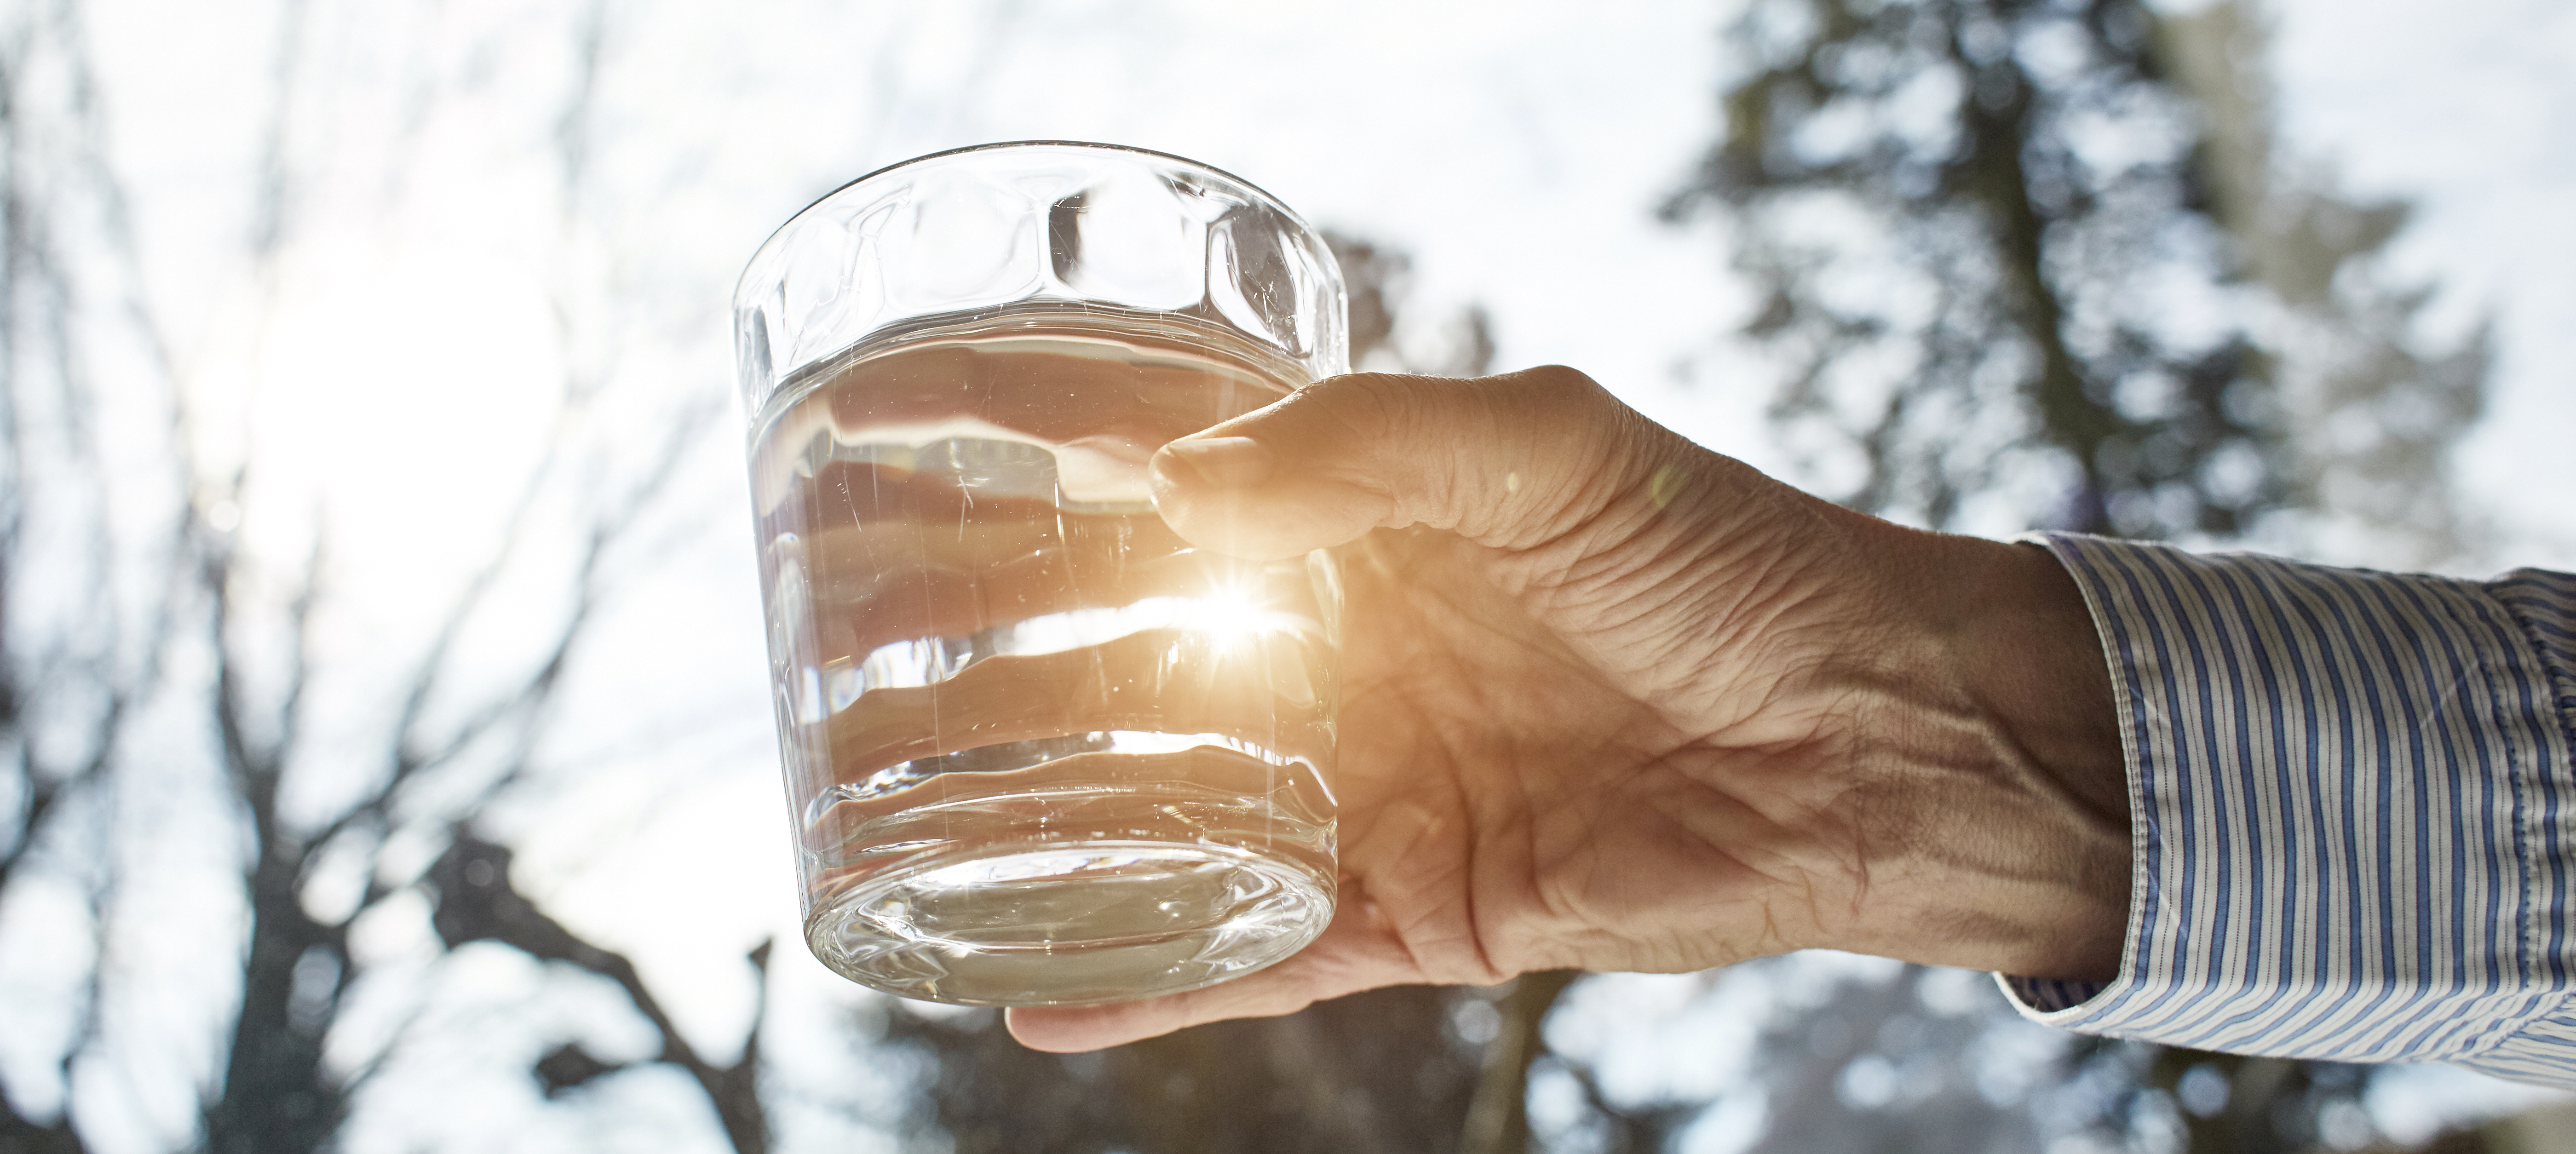 You Might Be Experiencing Dehydration – and Why That’s Risky